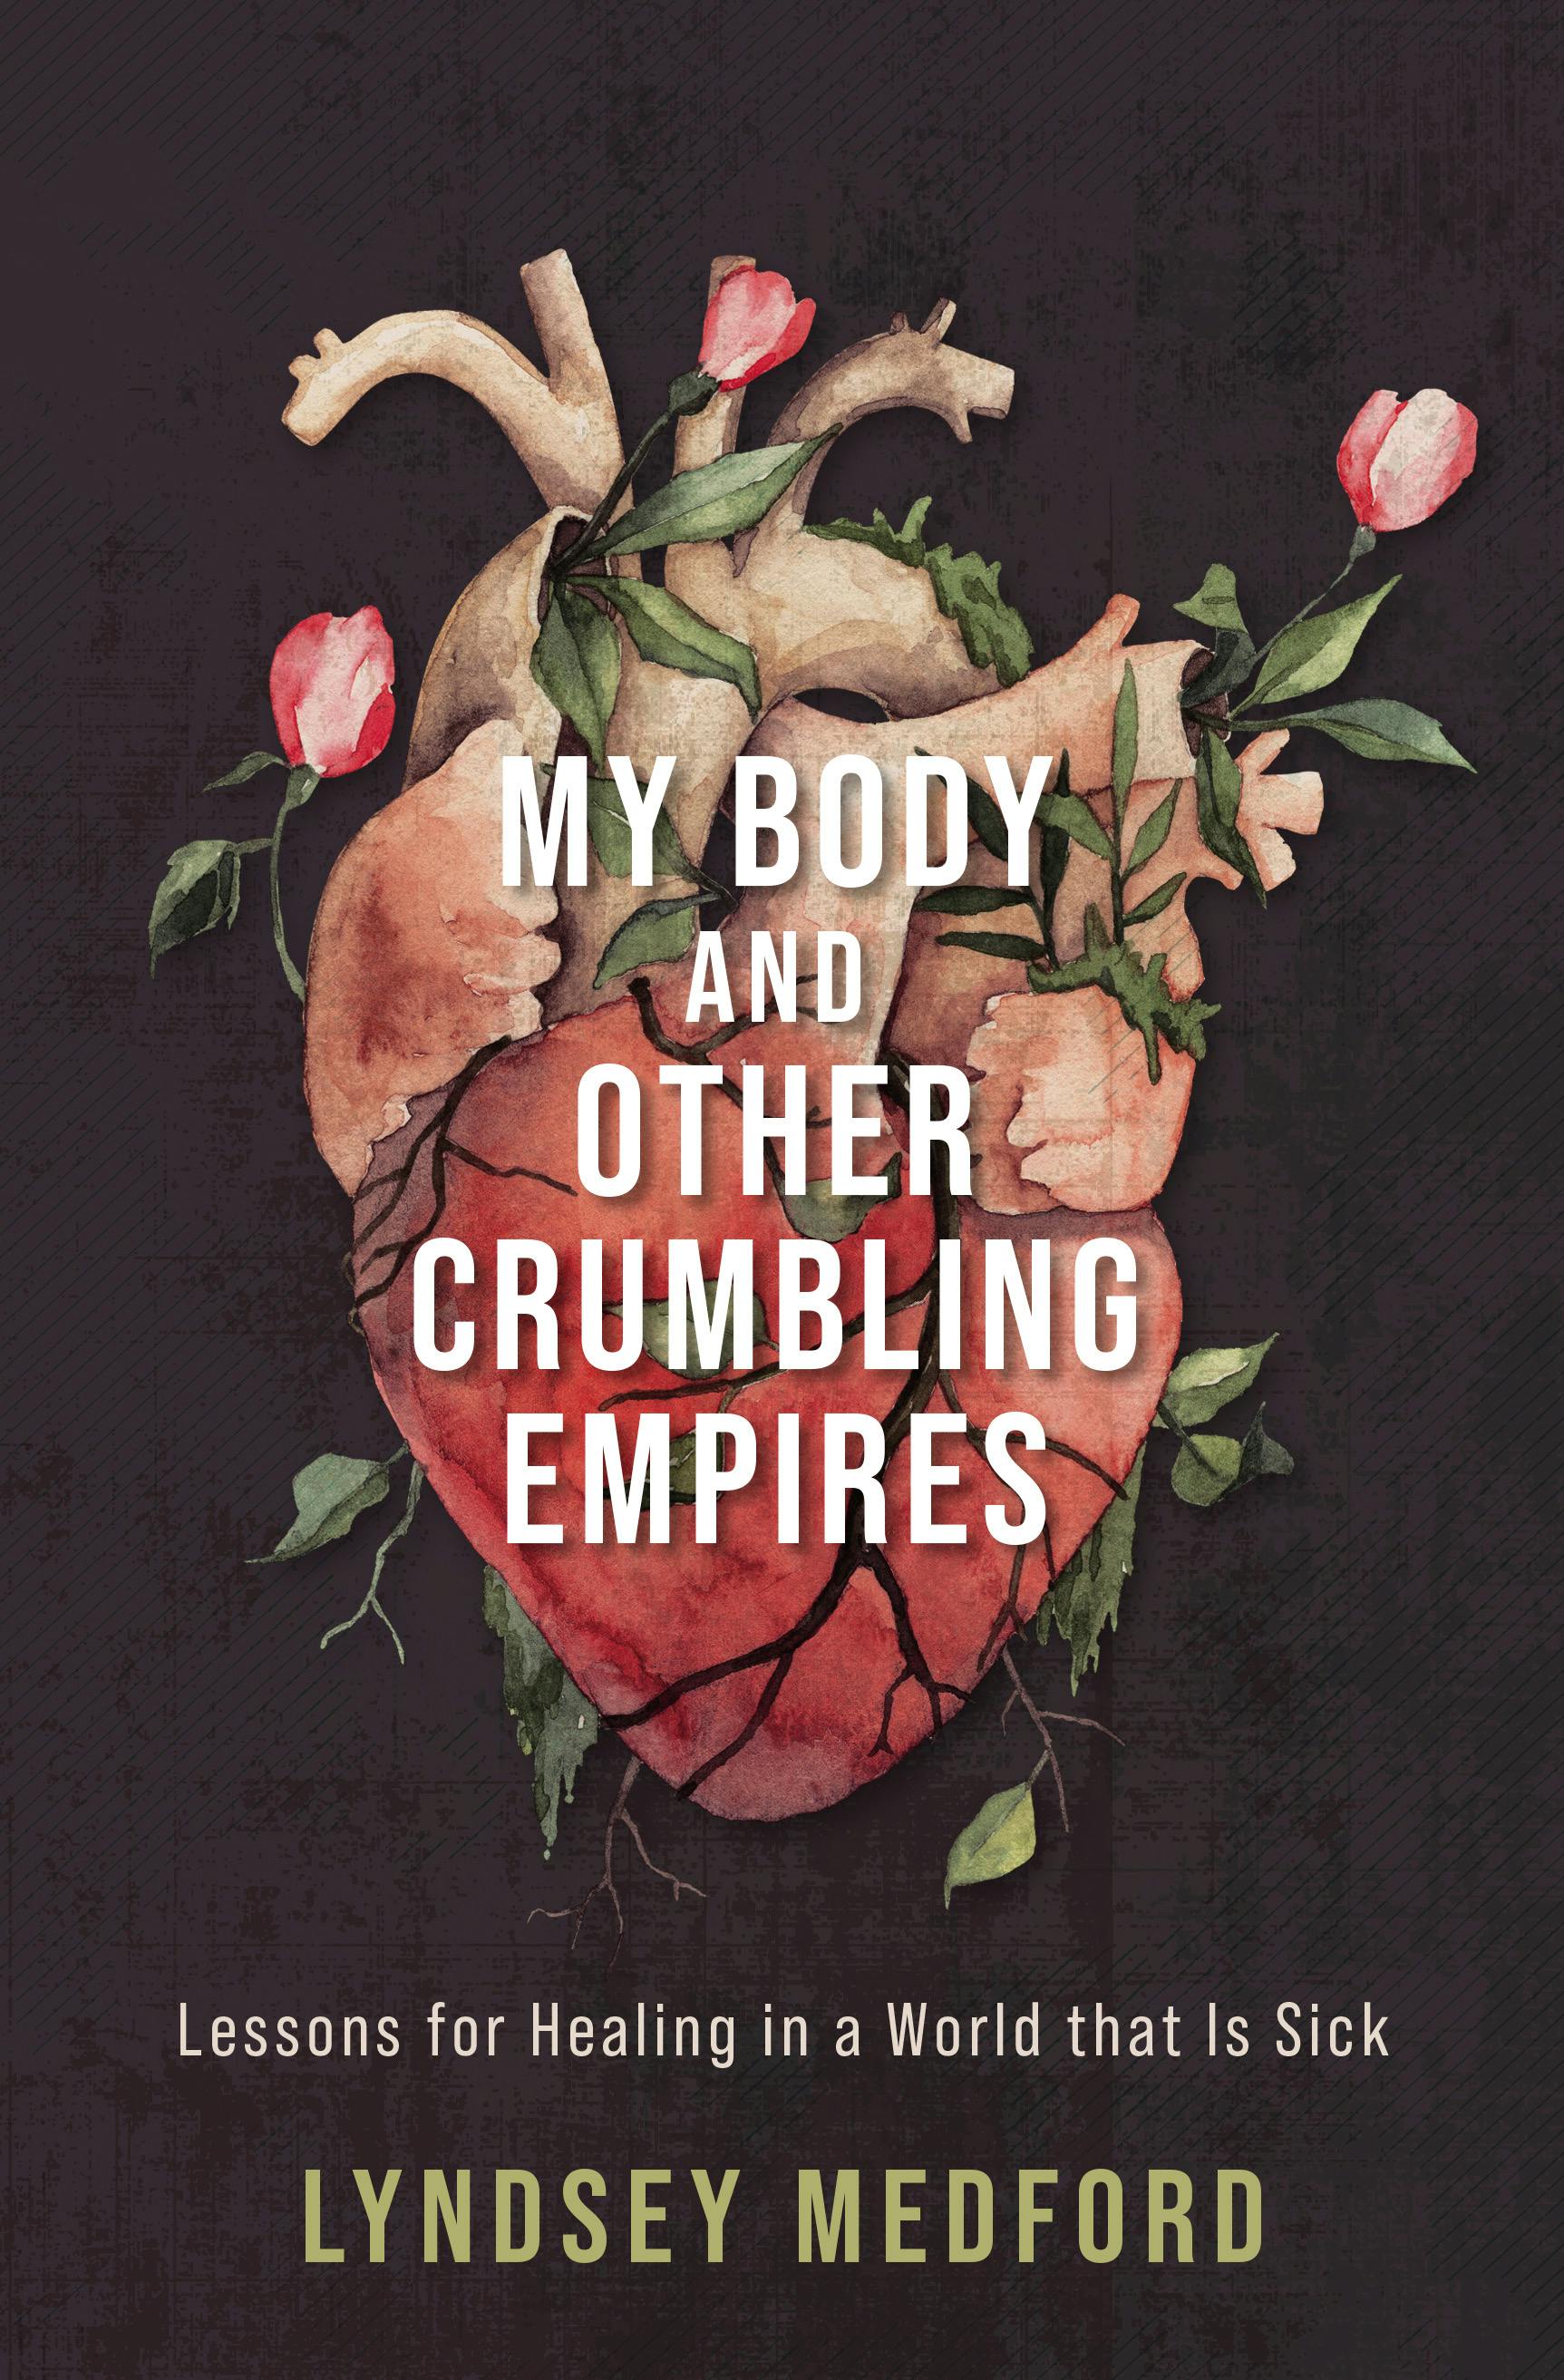 Lyndsey’s book, My Body and Other Crumbling Empires: lessons for healing in a world that is sick. It has a black background with a watercolor painting of a human heart surrounded by vines and flowers.